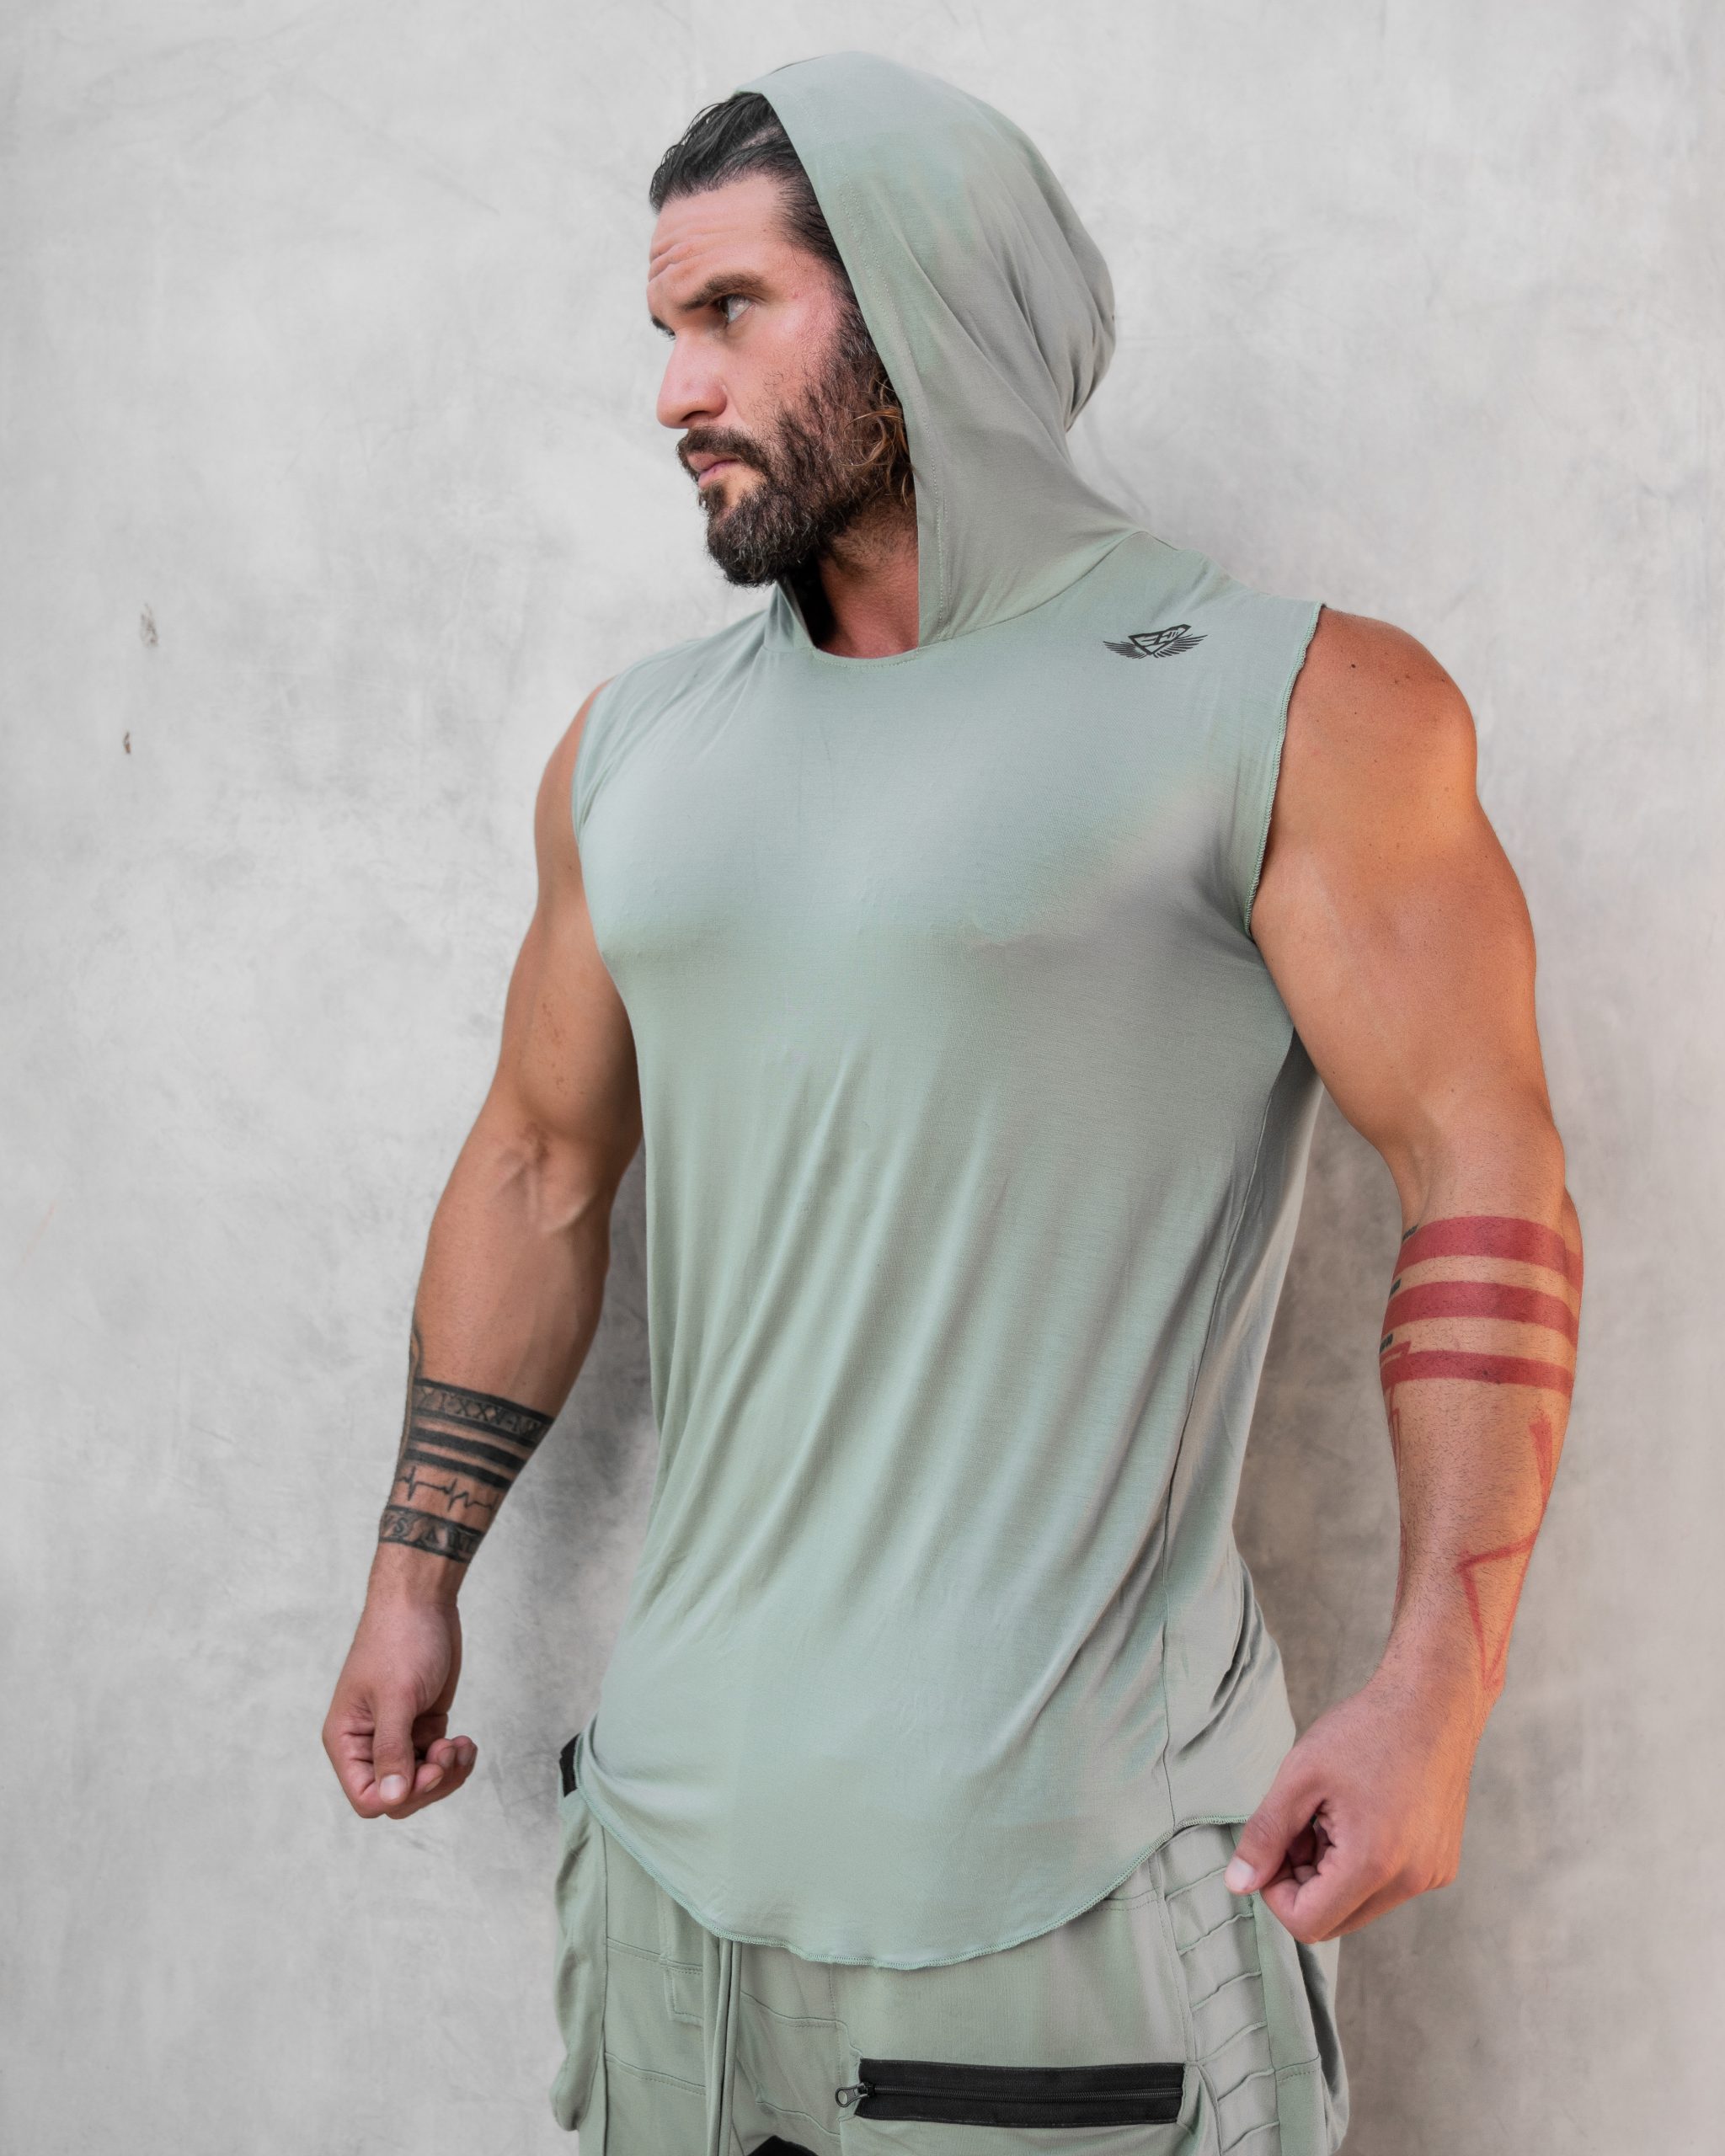 Body Engineers - Buy clothing from www.engineered-life.com